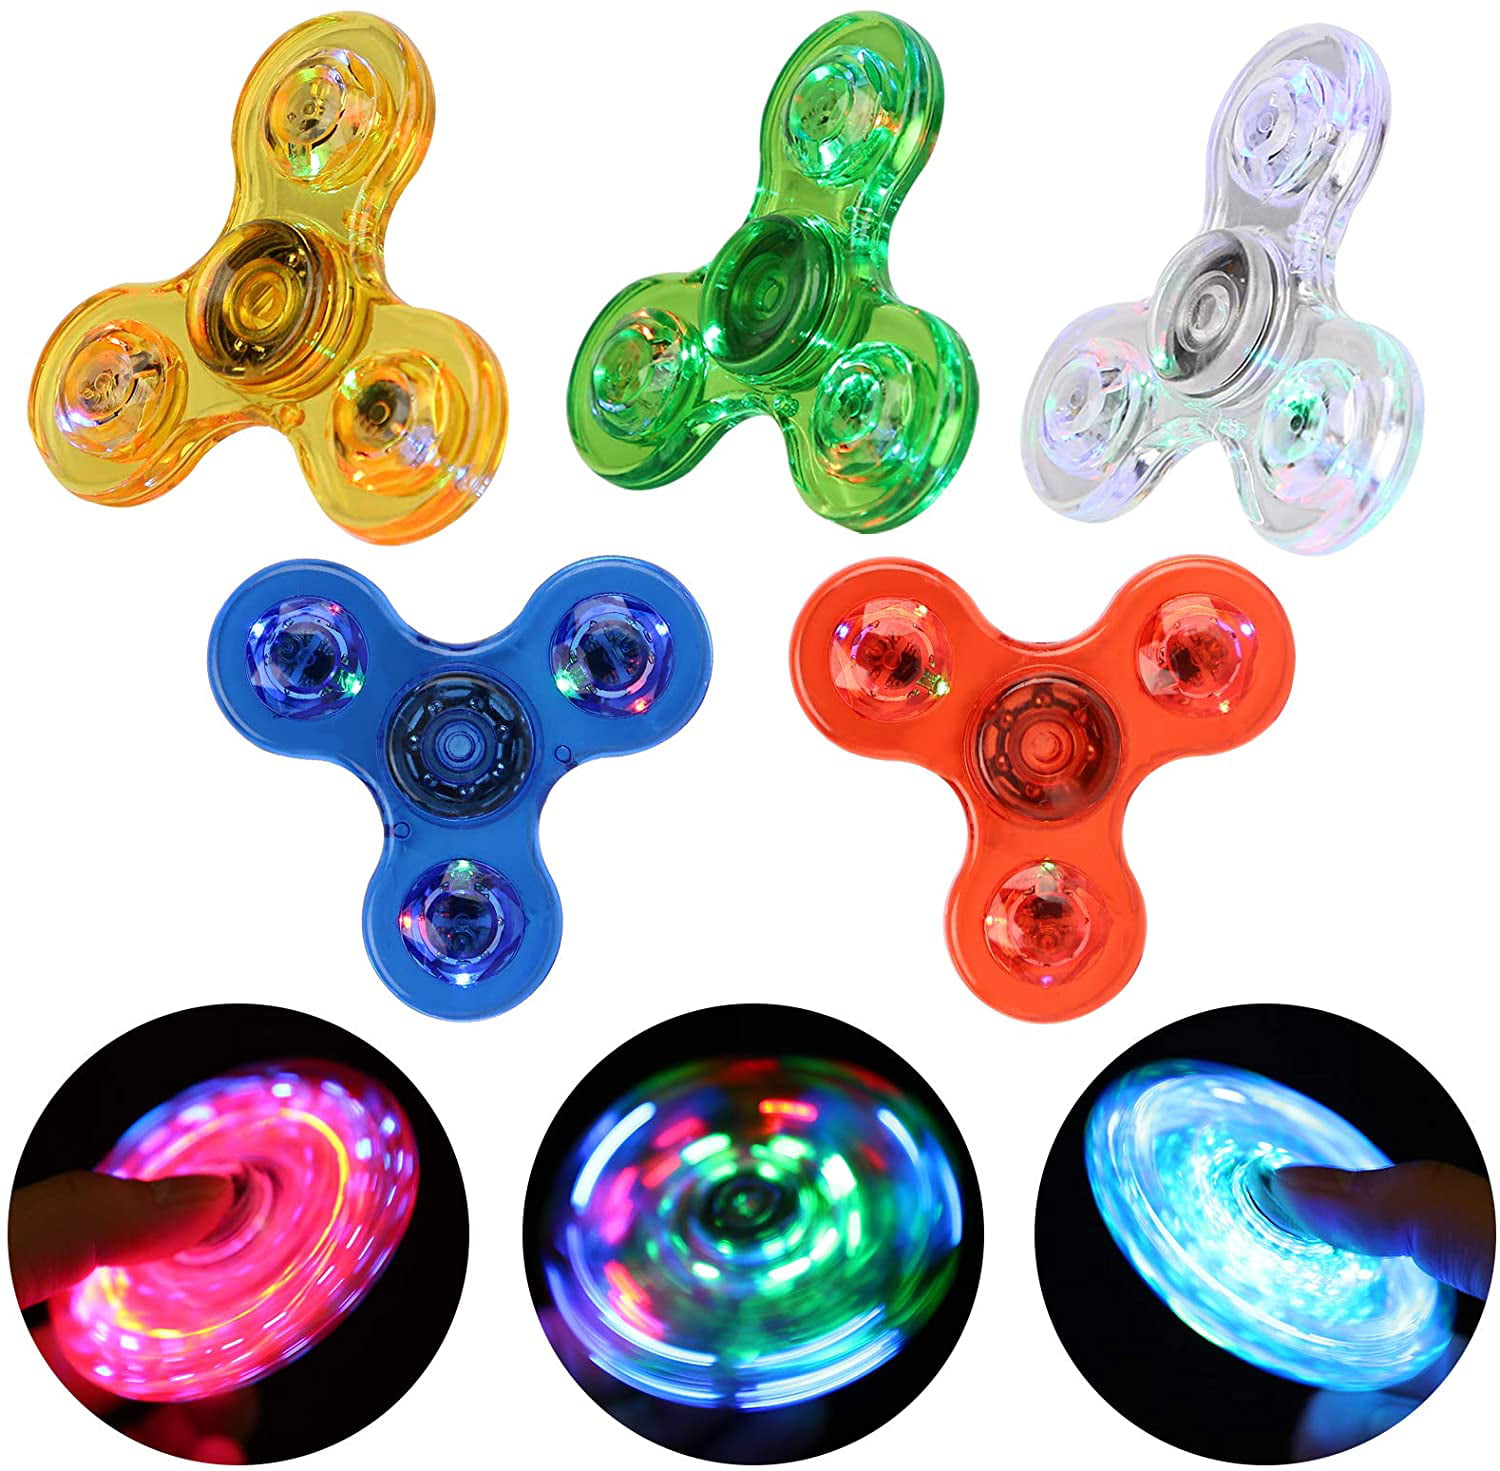 Fidget Spinner Anxiety Stress Relief Focus Toy ADHD SPECIAL DEAL 6 for 2! 